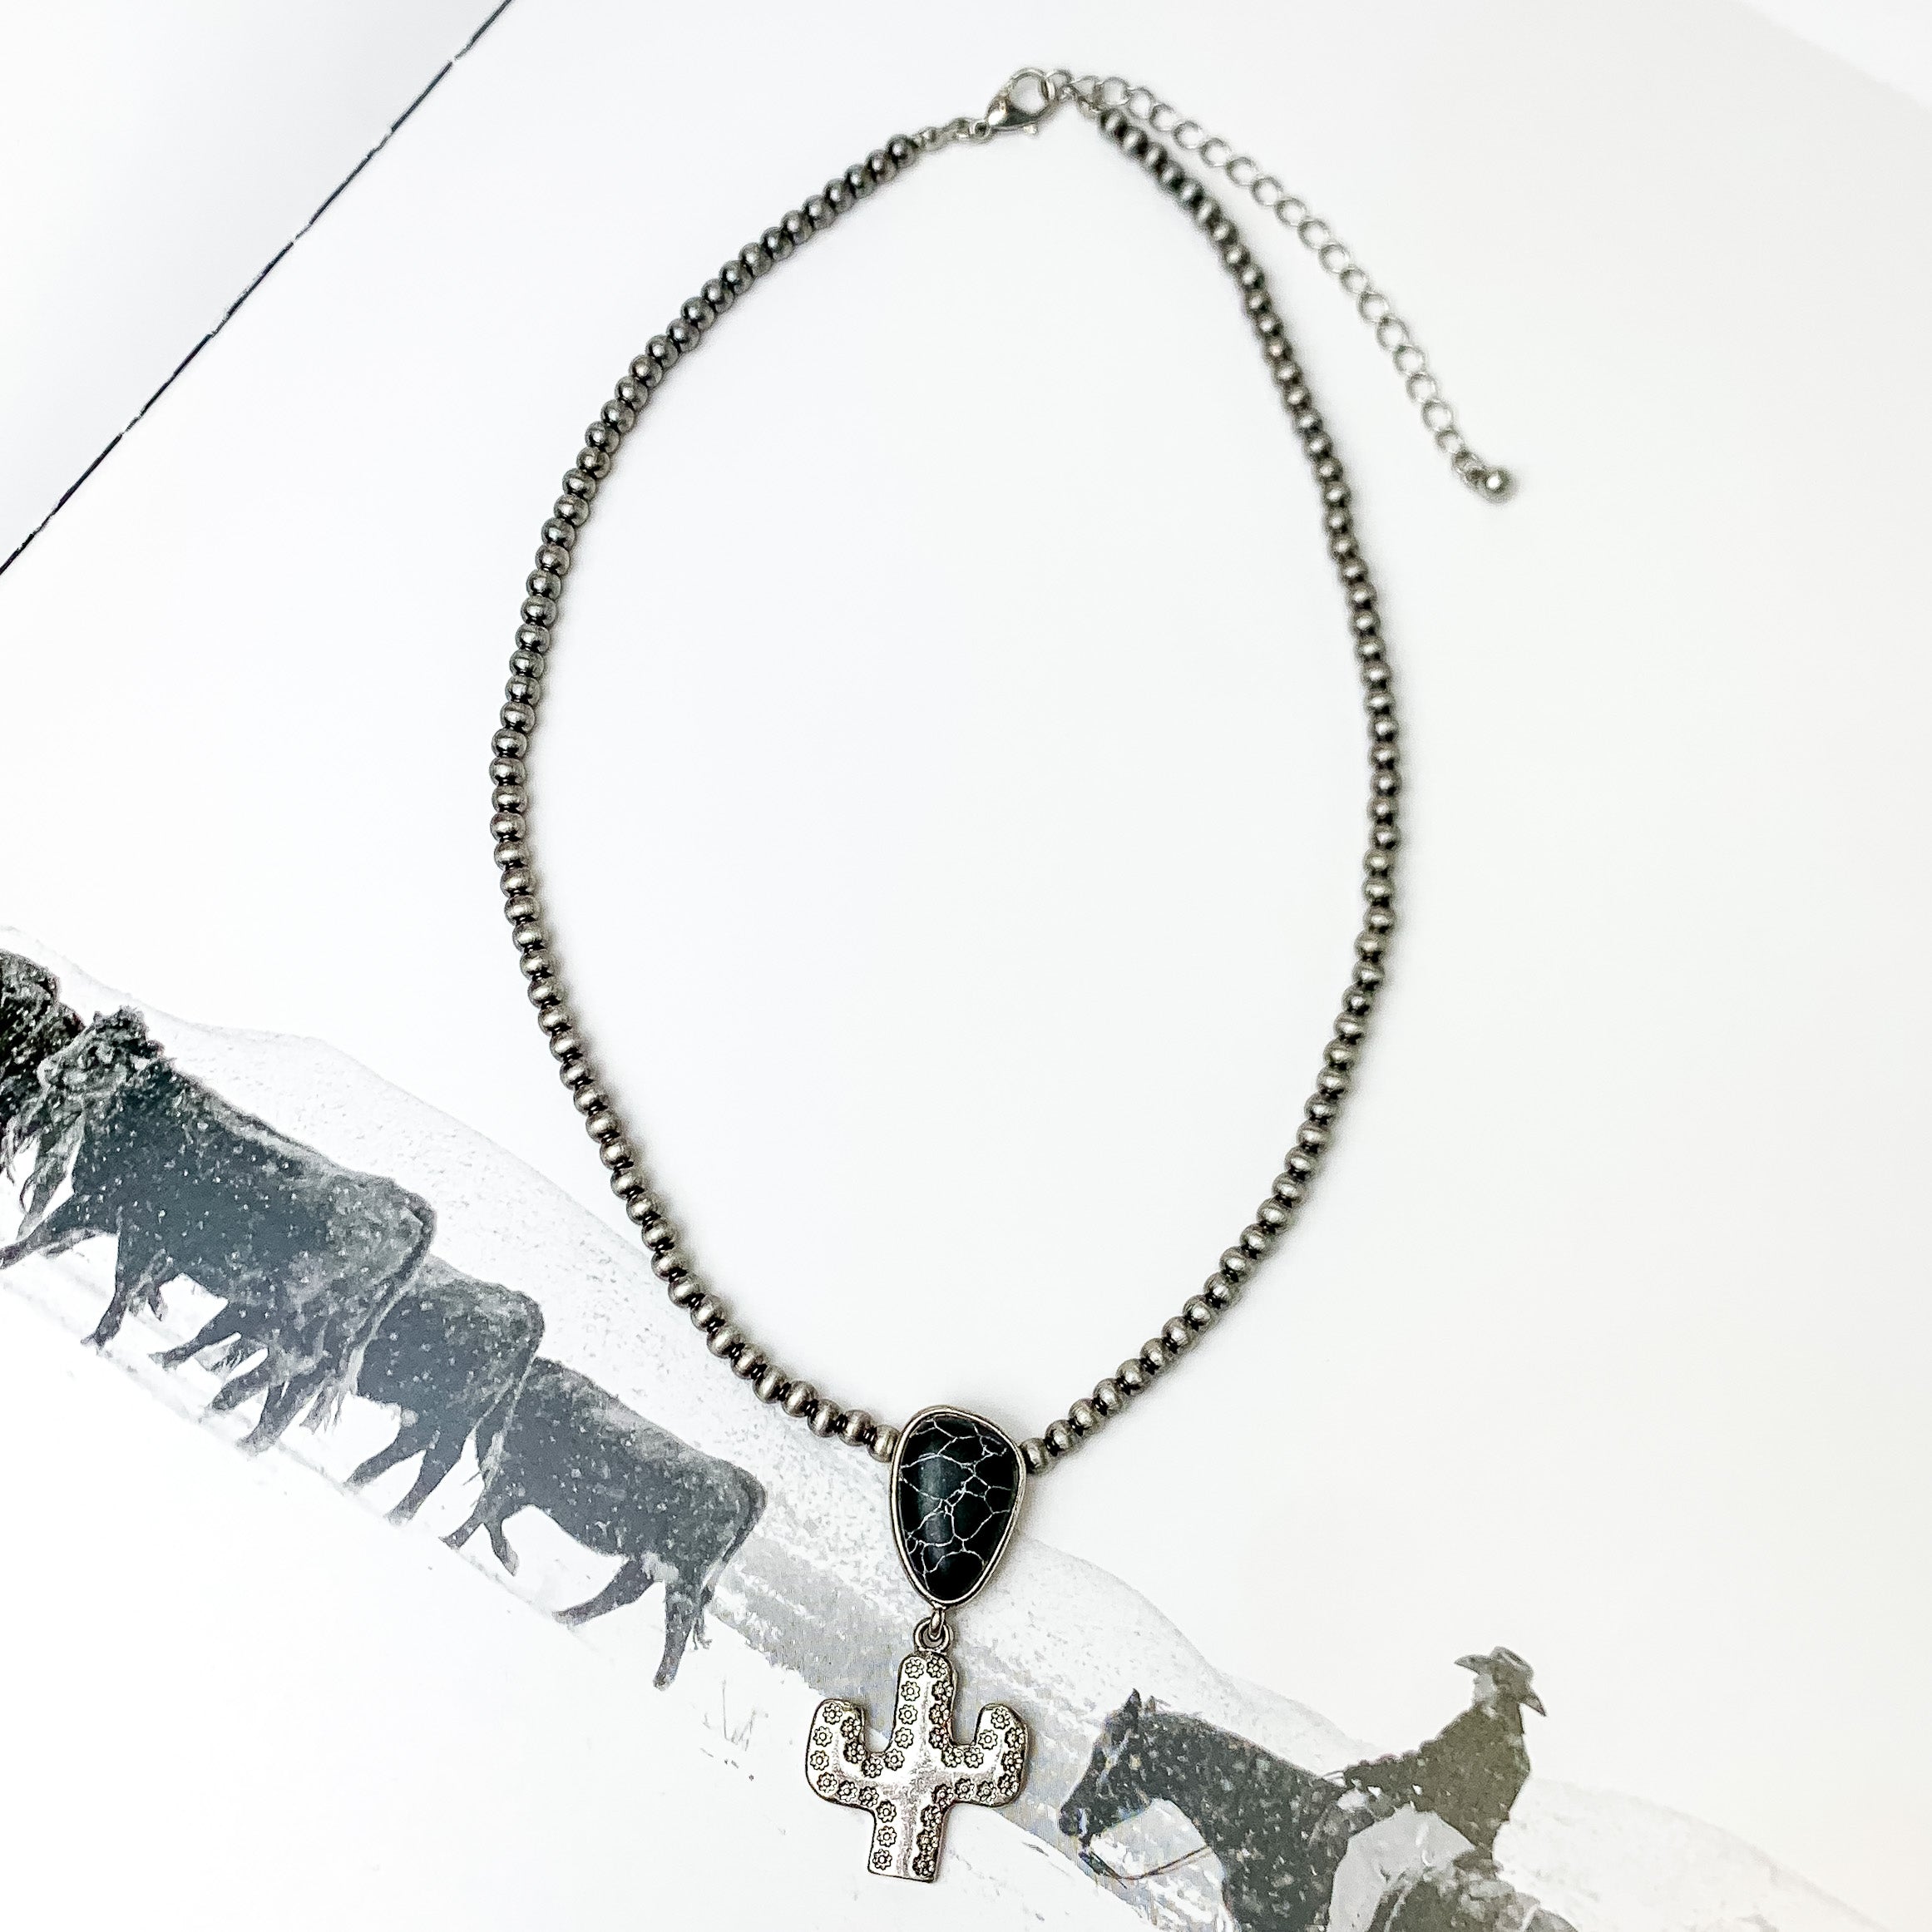 Cactus Queen Faux Navajo Silver Tone Necklace with Stone in Black. Pictured on a white page with a western scone printed on the page.